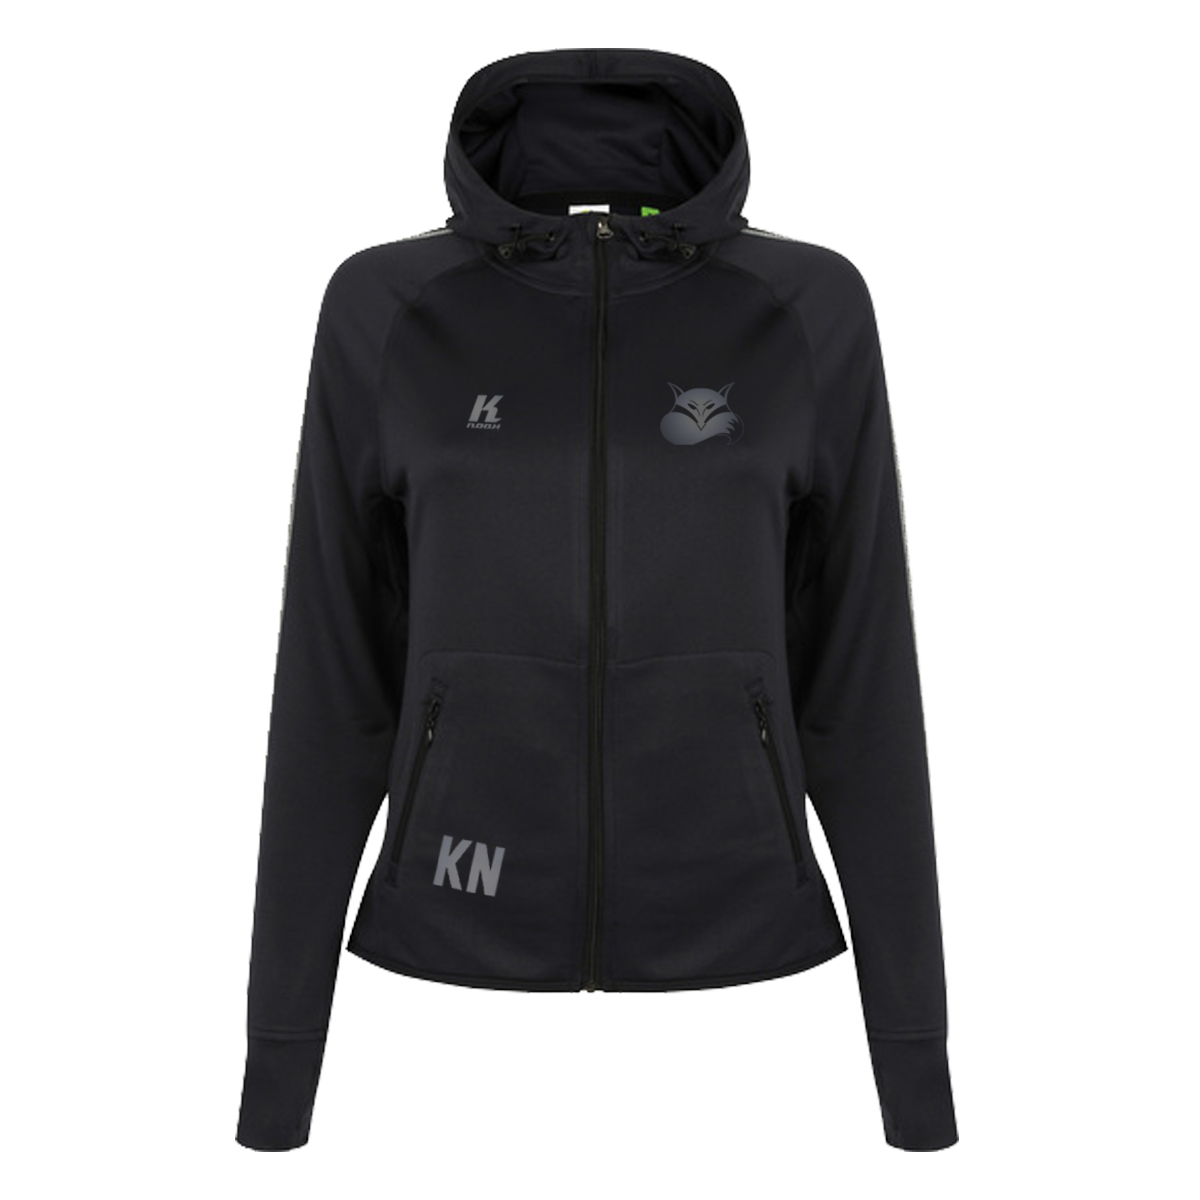 Foxes "Blackline" Womens Zip Hoodie TL551 with Initials/Playernumber